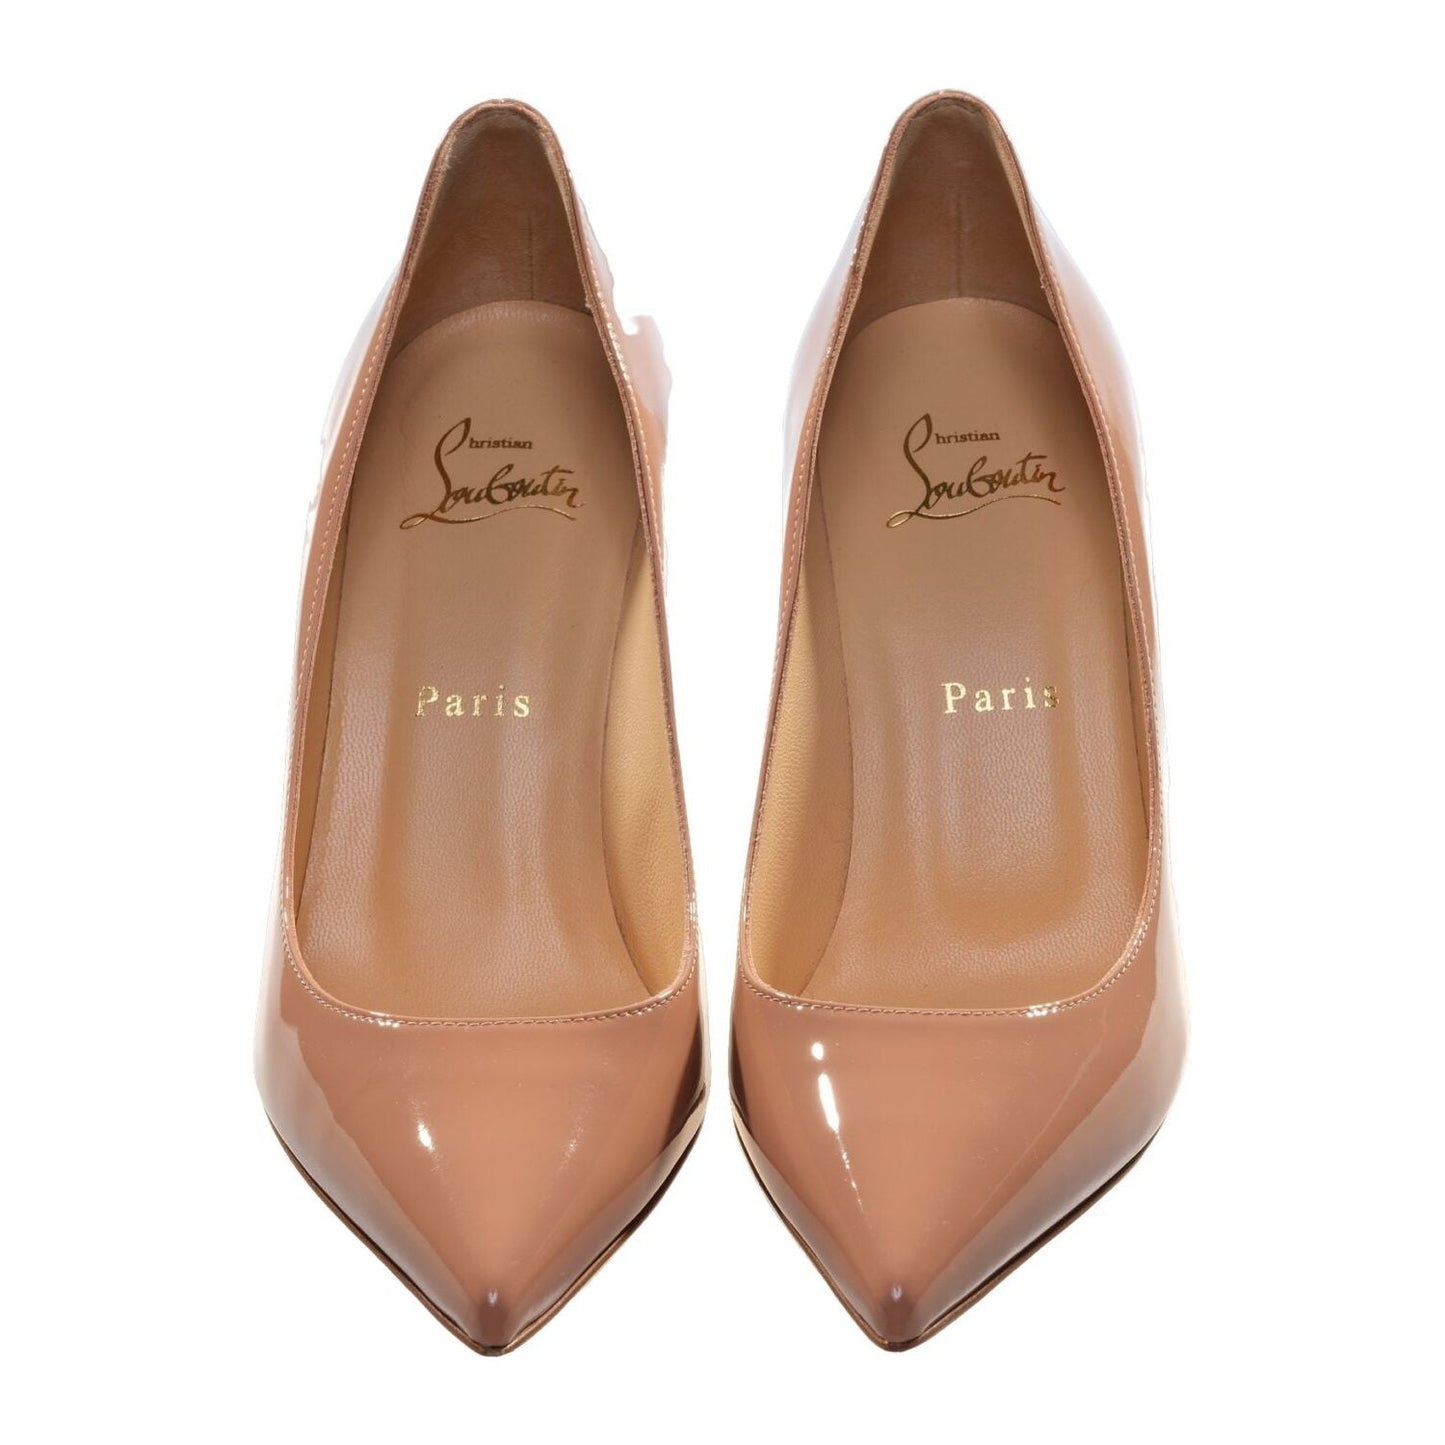 Kate Patent 85 Blush Nude Patent Leather High Heels